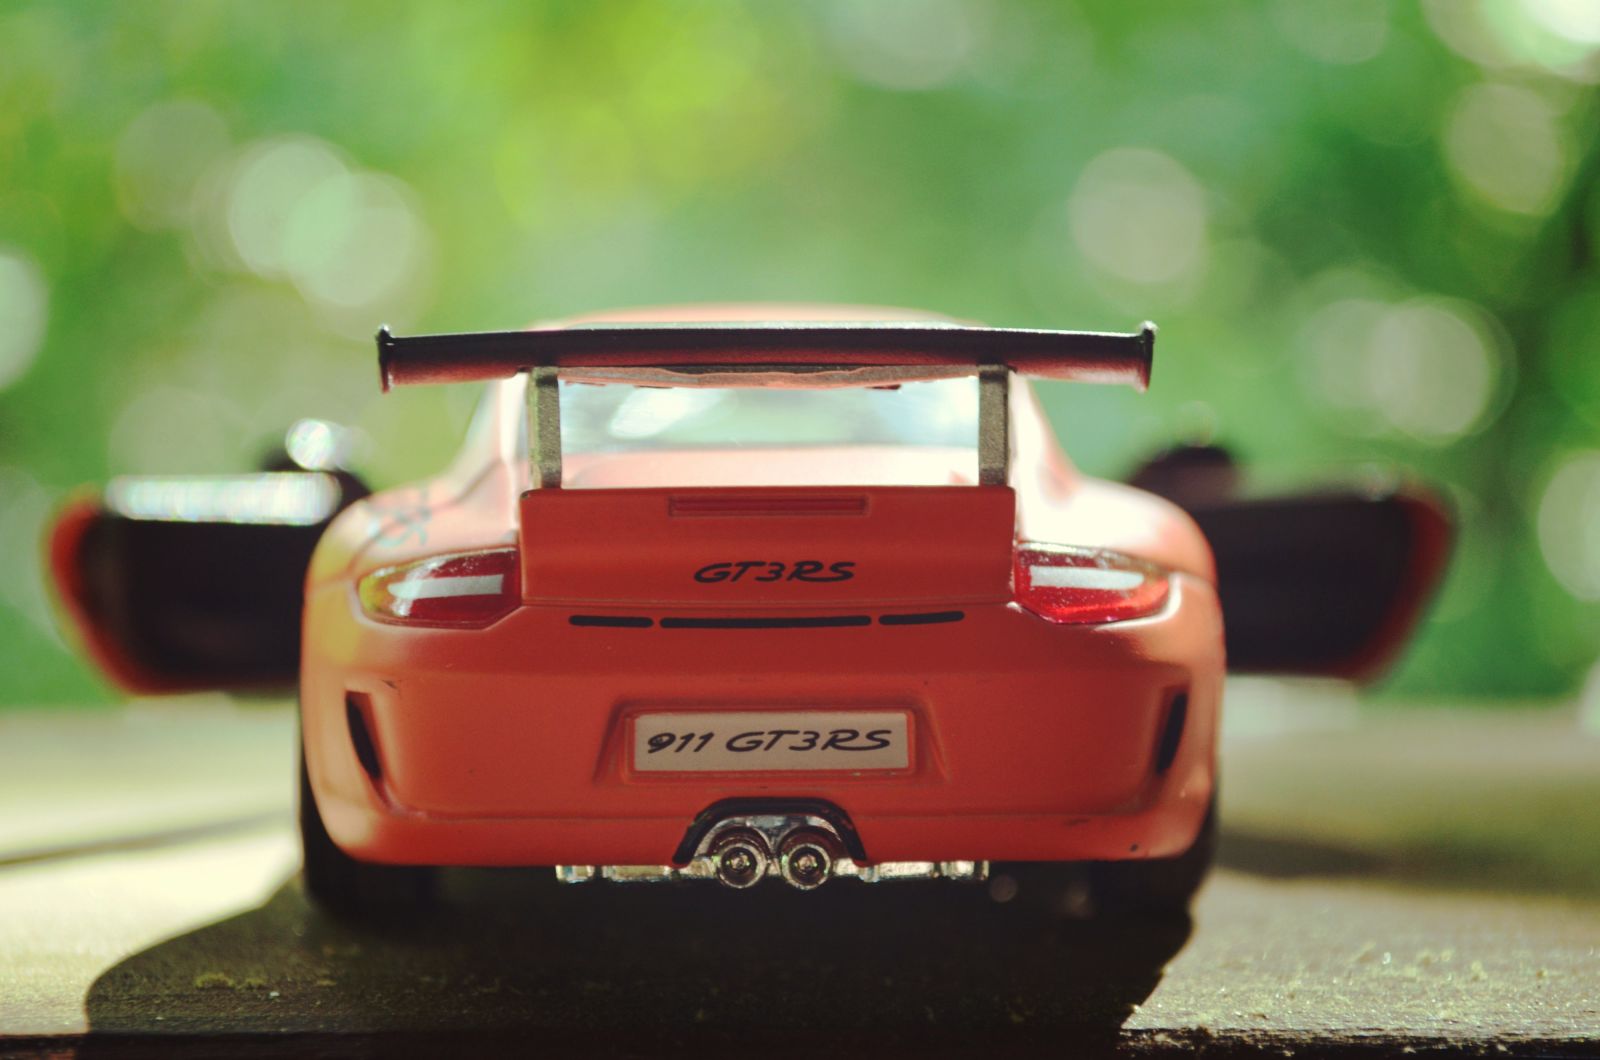 Illustration for article titled Teutonic Tuesday: 997 GT3 RS